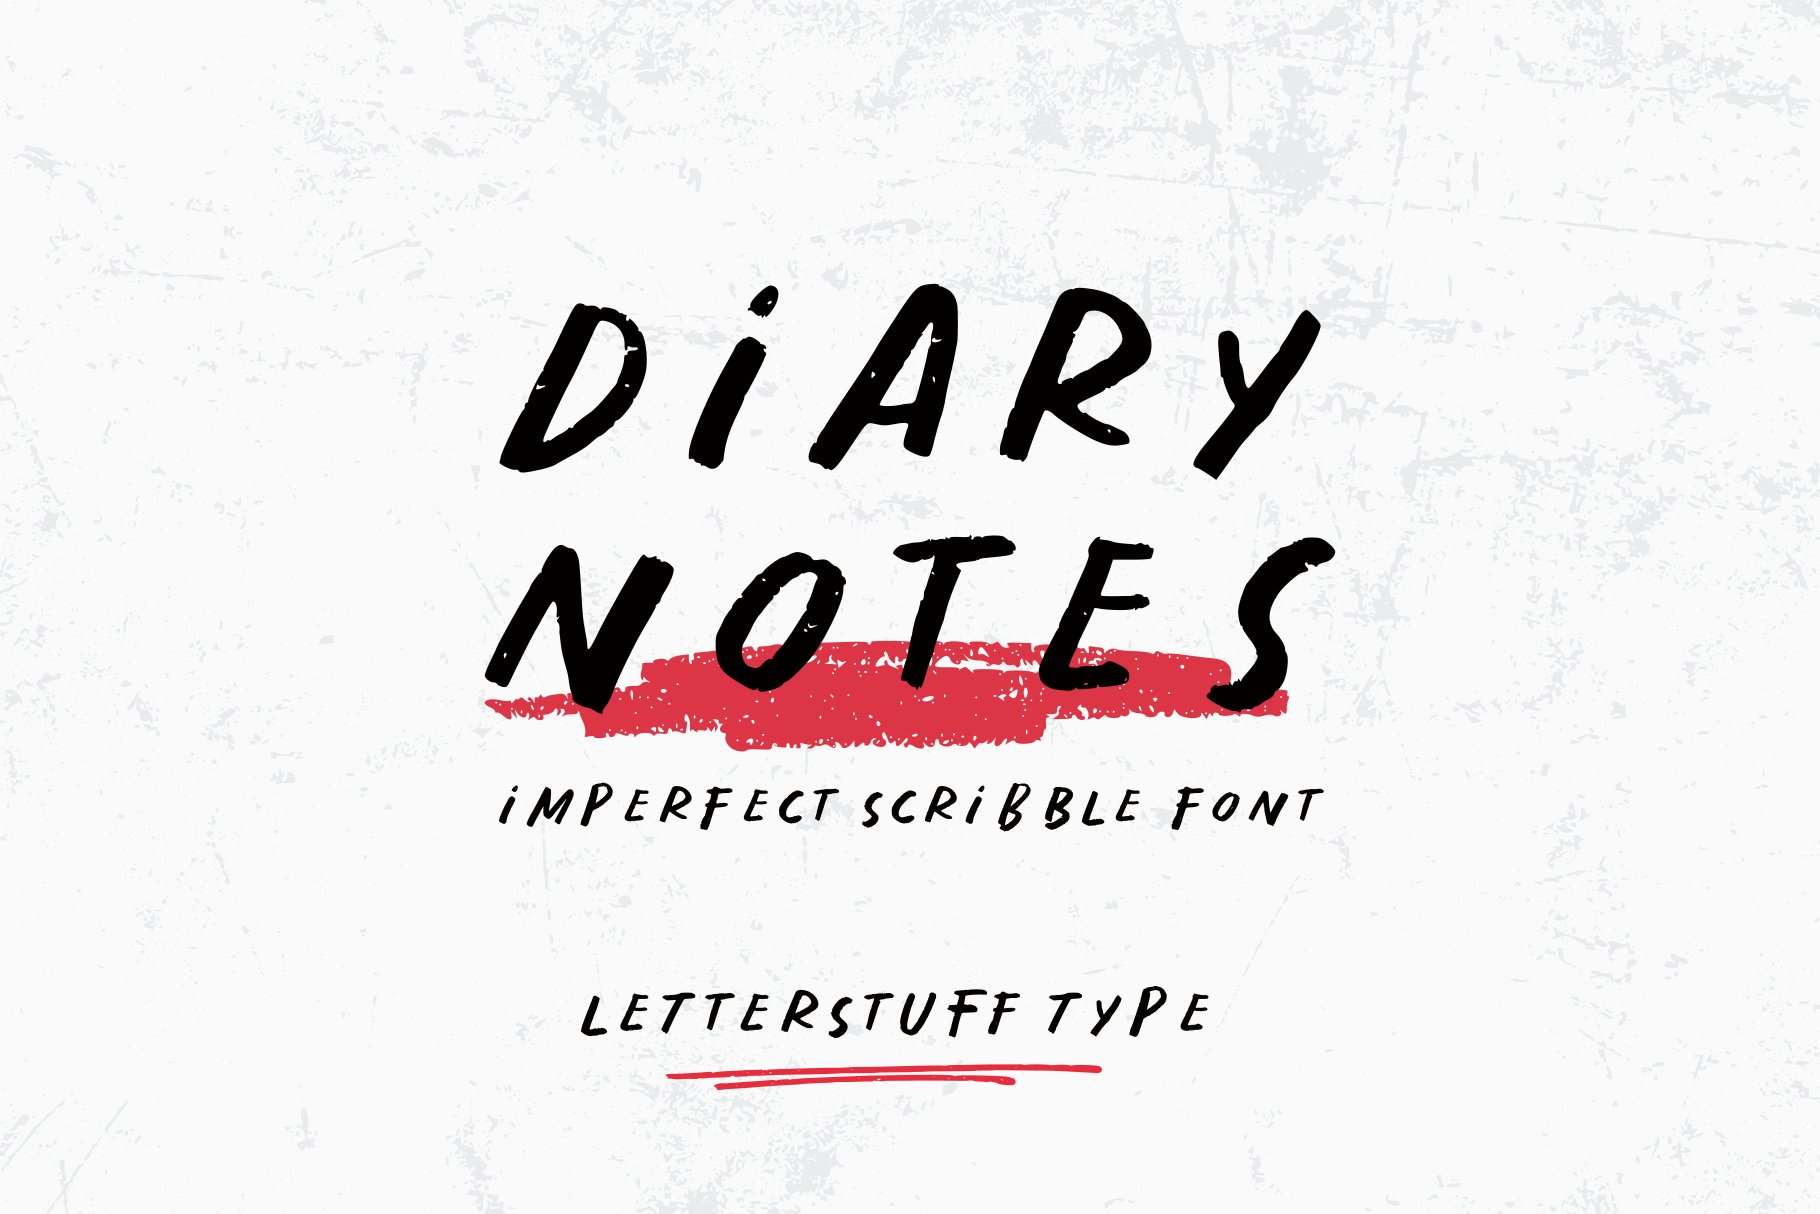 Diary Notes | Scribble Font cover image.